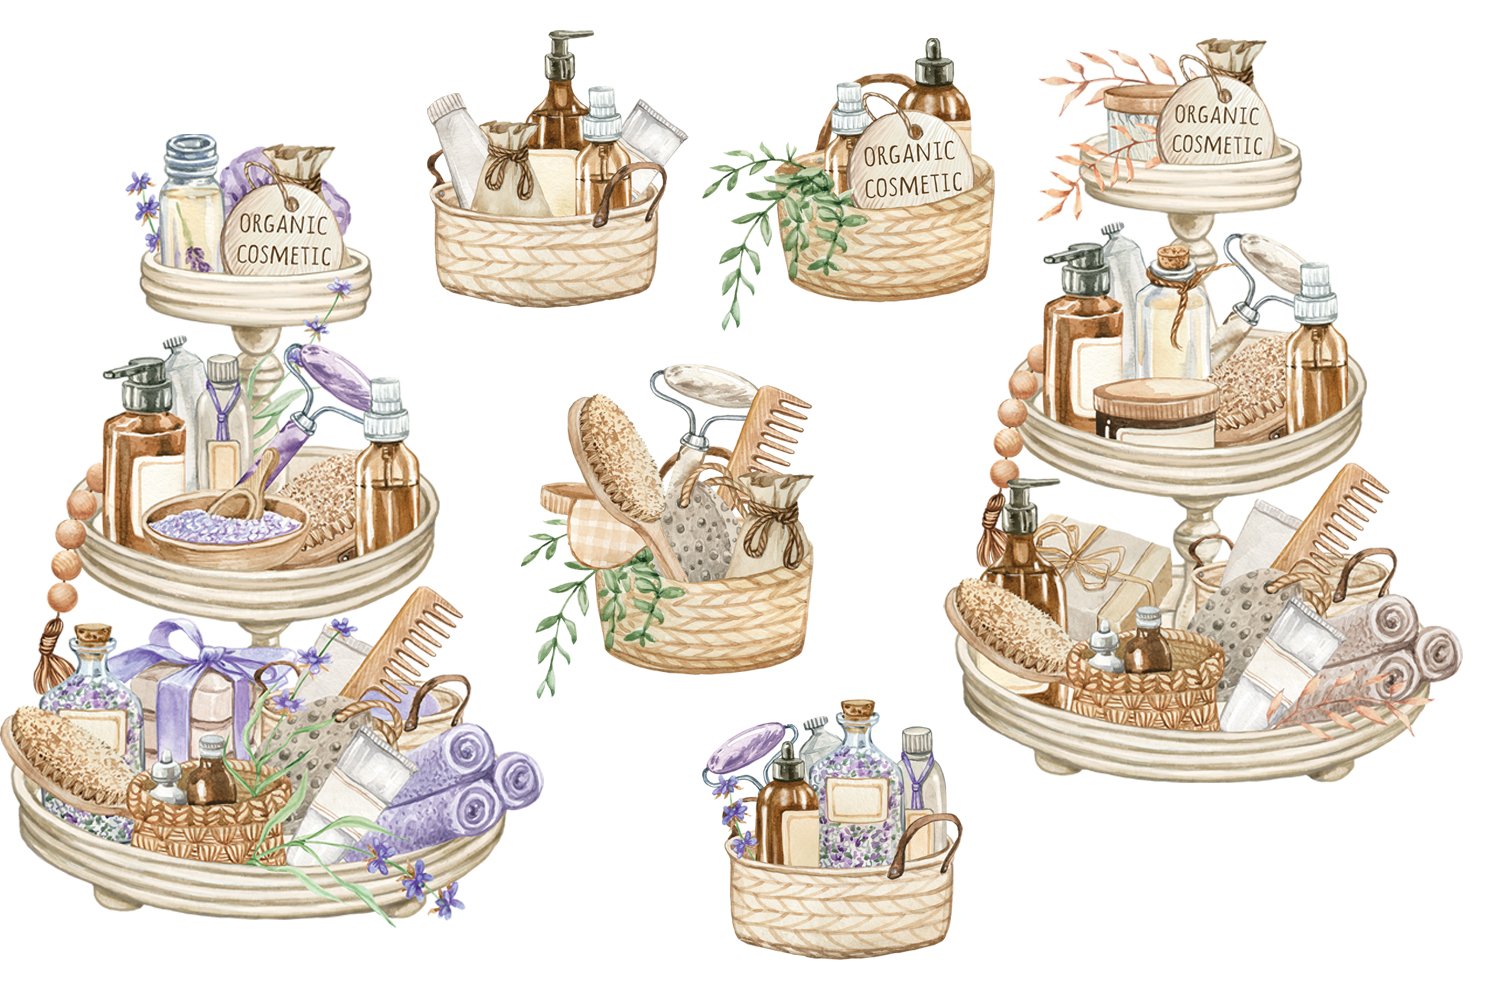 Beautiful baskets with self-care treatment.